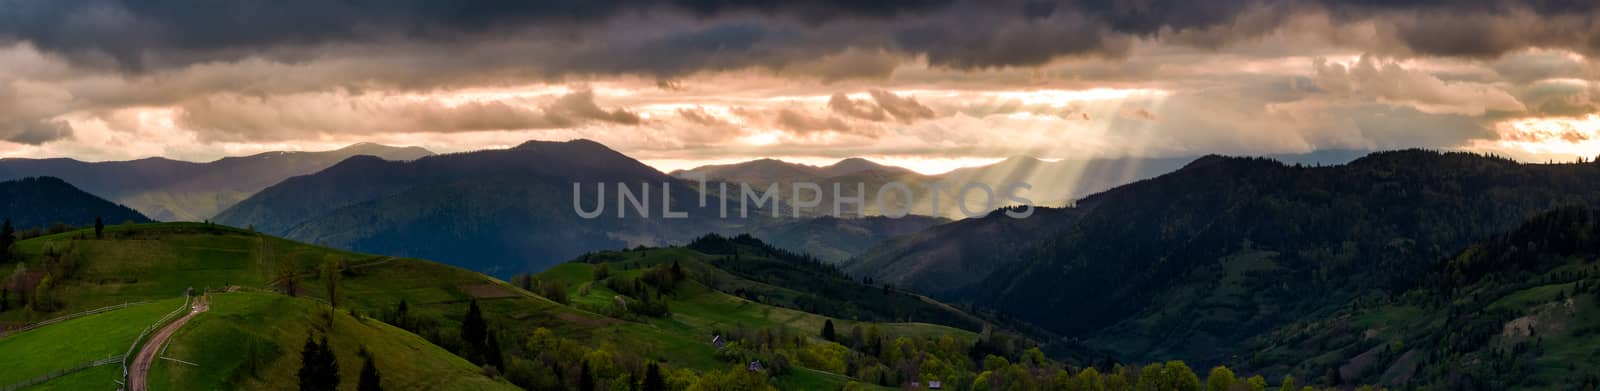 panorama of mountainous countryside at sunset. country road through rolling hills in to the distance. heavy clouds over the ridge. beams of lite from the heaven. beautiful and mysterious landscape